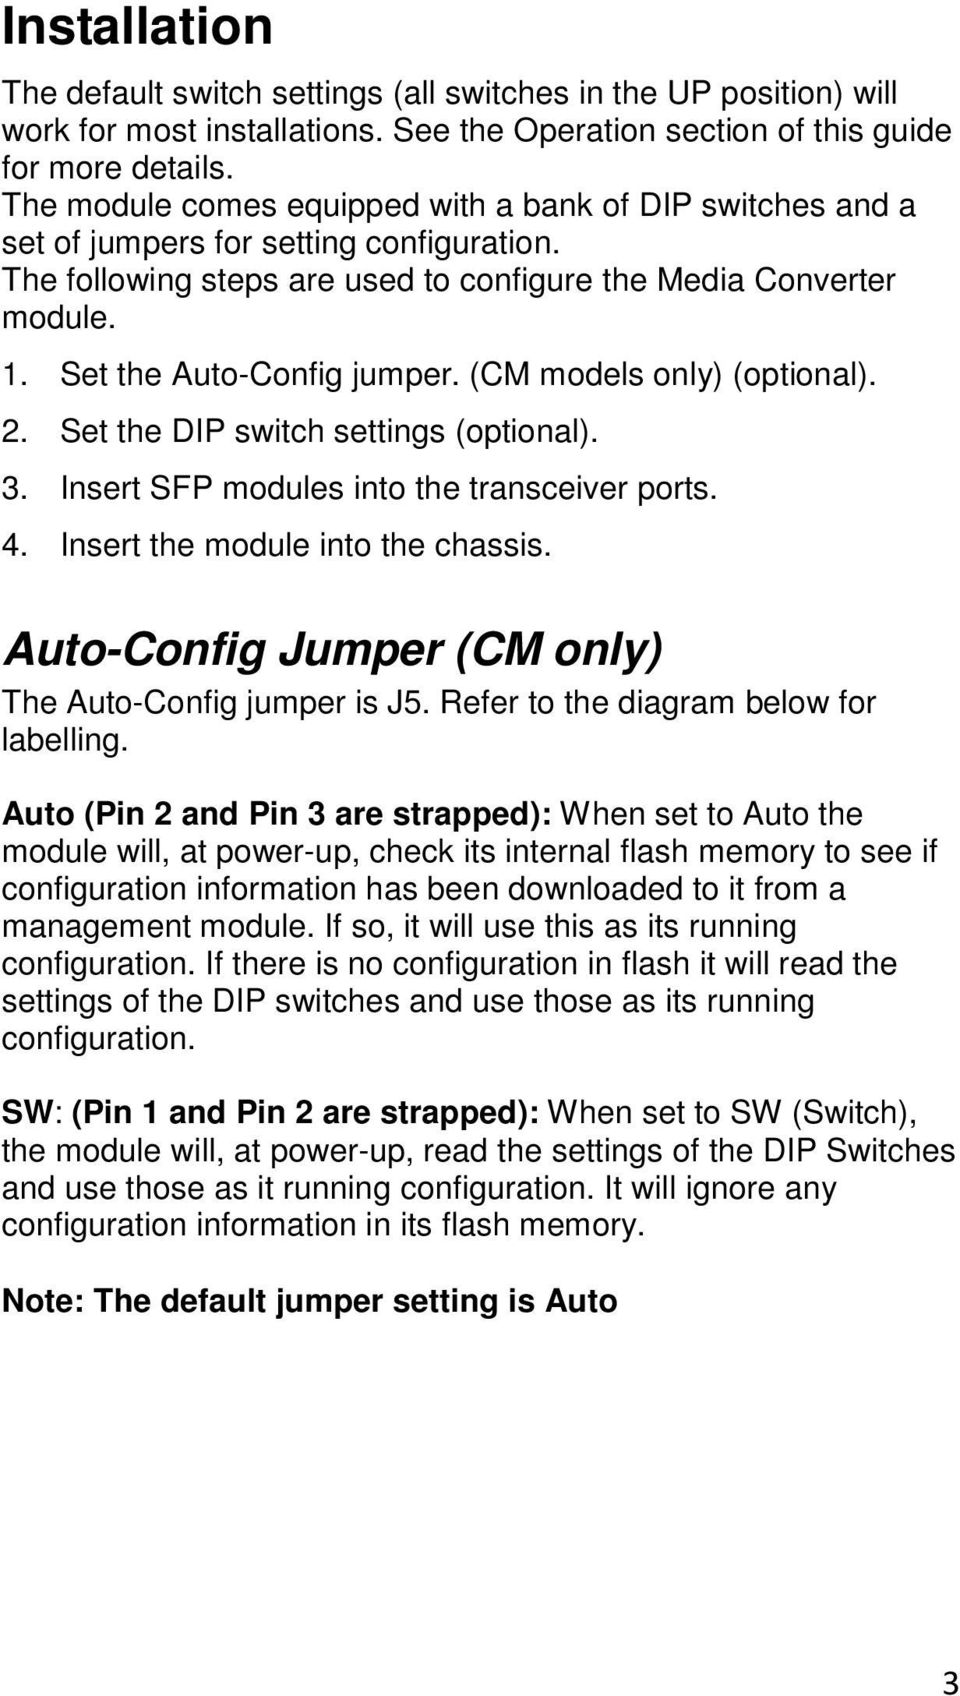 Set the Auto-Config jumper. (CM models only) (optional). 2. Set the DIP switch settings (optional). 3. Insert SFP modules into the transceiver ports. 4. Insert the module into the chassis.